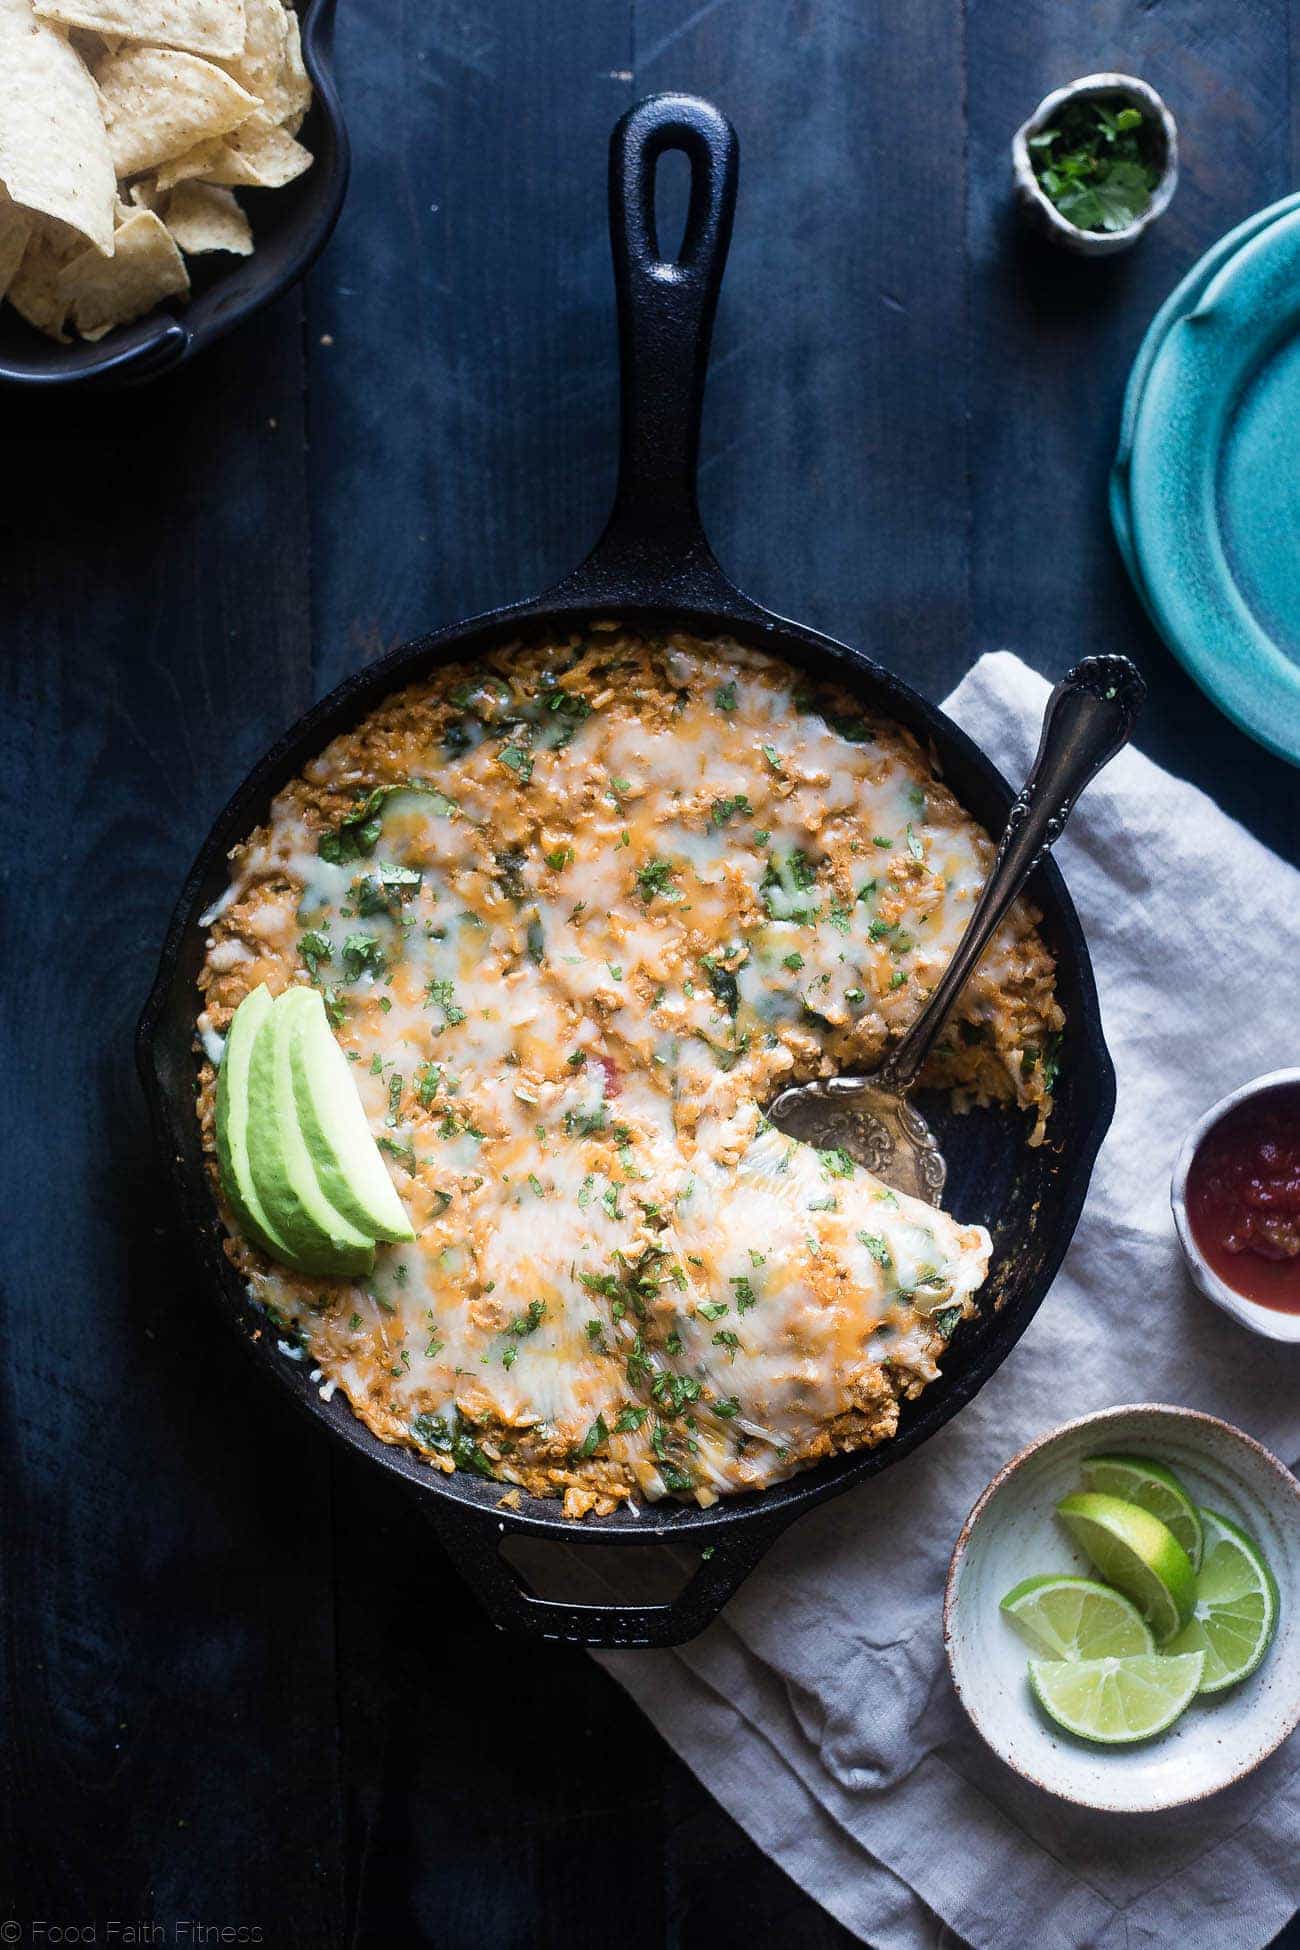 One Pot Mexican Chicken Rice Casserole - This chicken Mexican rice casserole uses sweet potato for extra creaminess! It's a healthy, gluten free, 8 ingredient dinner for busy weeknights that is only 330 calories! | Foodfaithfitness.com | @FoodFaithFit